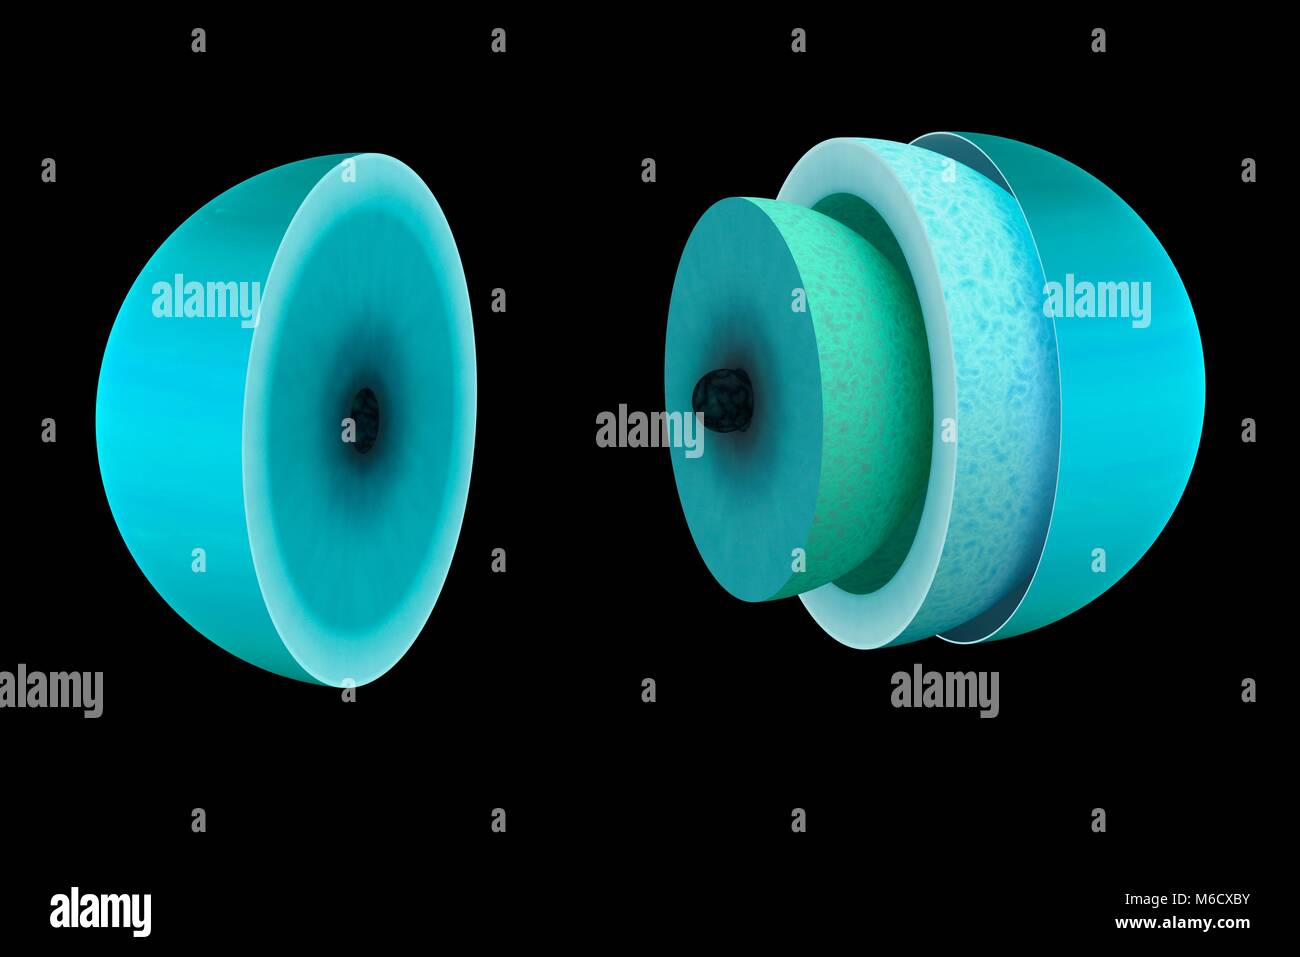 Diagram showing the theoretical interior of the ice giant planet Uranus. It probably looks very similar to the interior of Neptune. At the very centre is a rocky and icy core, similar and size and mass to the Earth. This is encased in a thick inner mantle, a slushy mixture of various ices including methane, ammonia and water. Above this is the outer mantle, which is made up of a mixture of liquid hydrogen and other elements. And finally there is a thick atmosphere, composed chiefly of hydrogen, helium and methane. Stock Photo